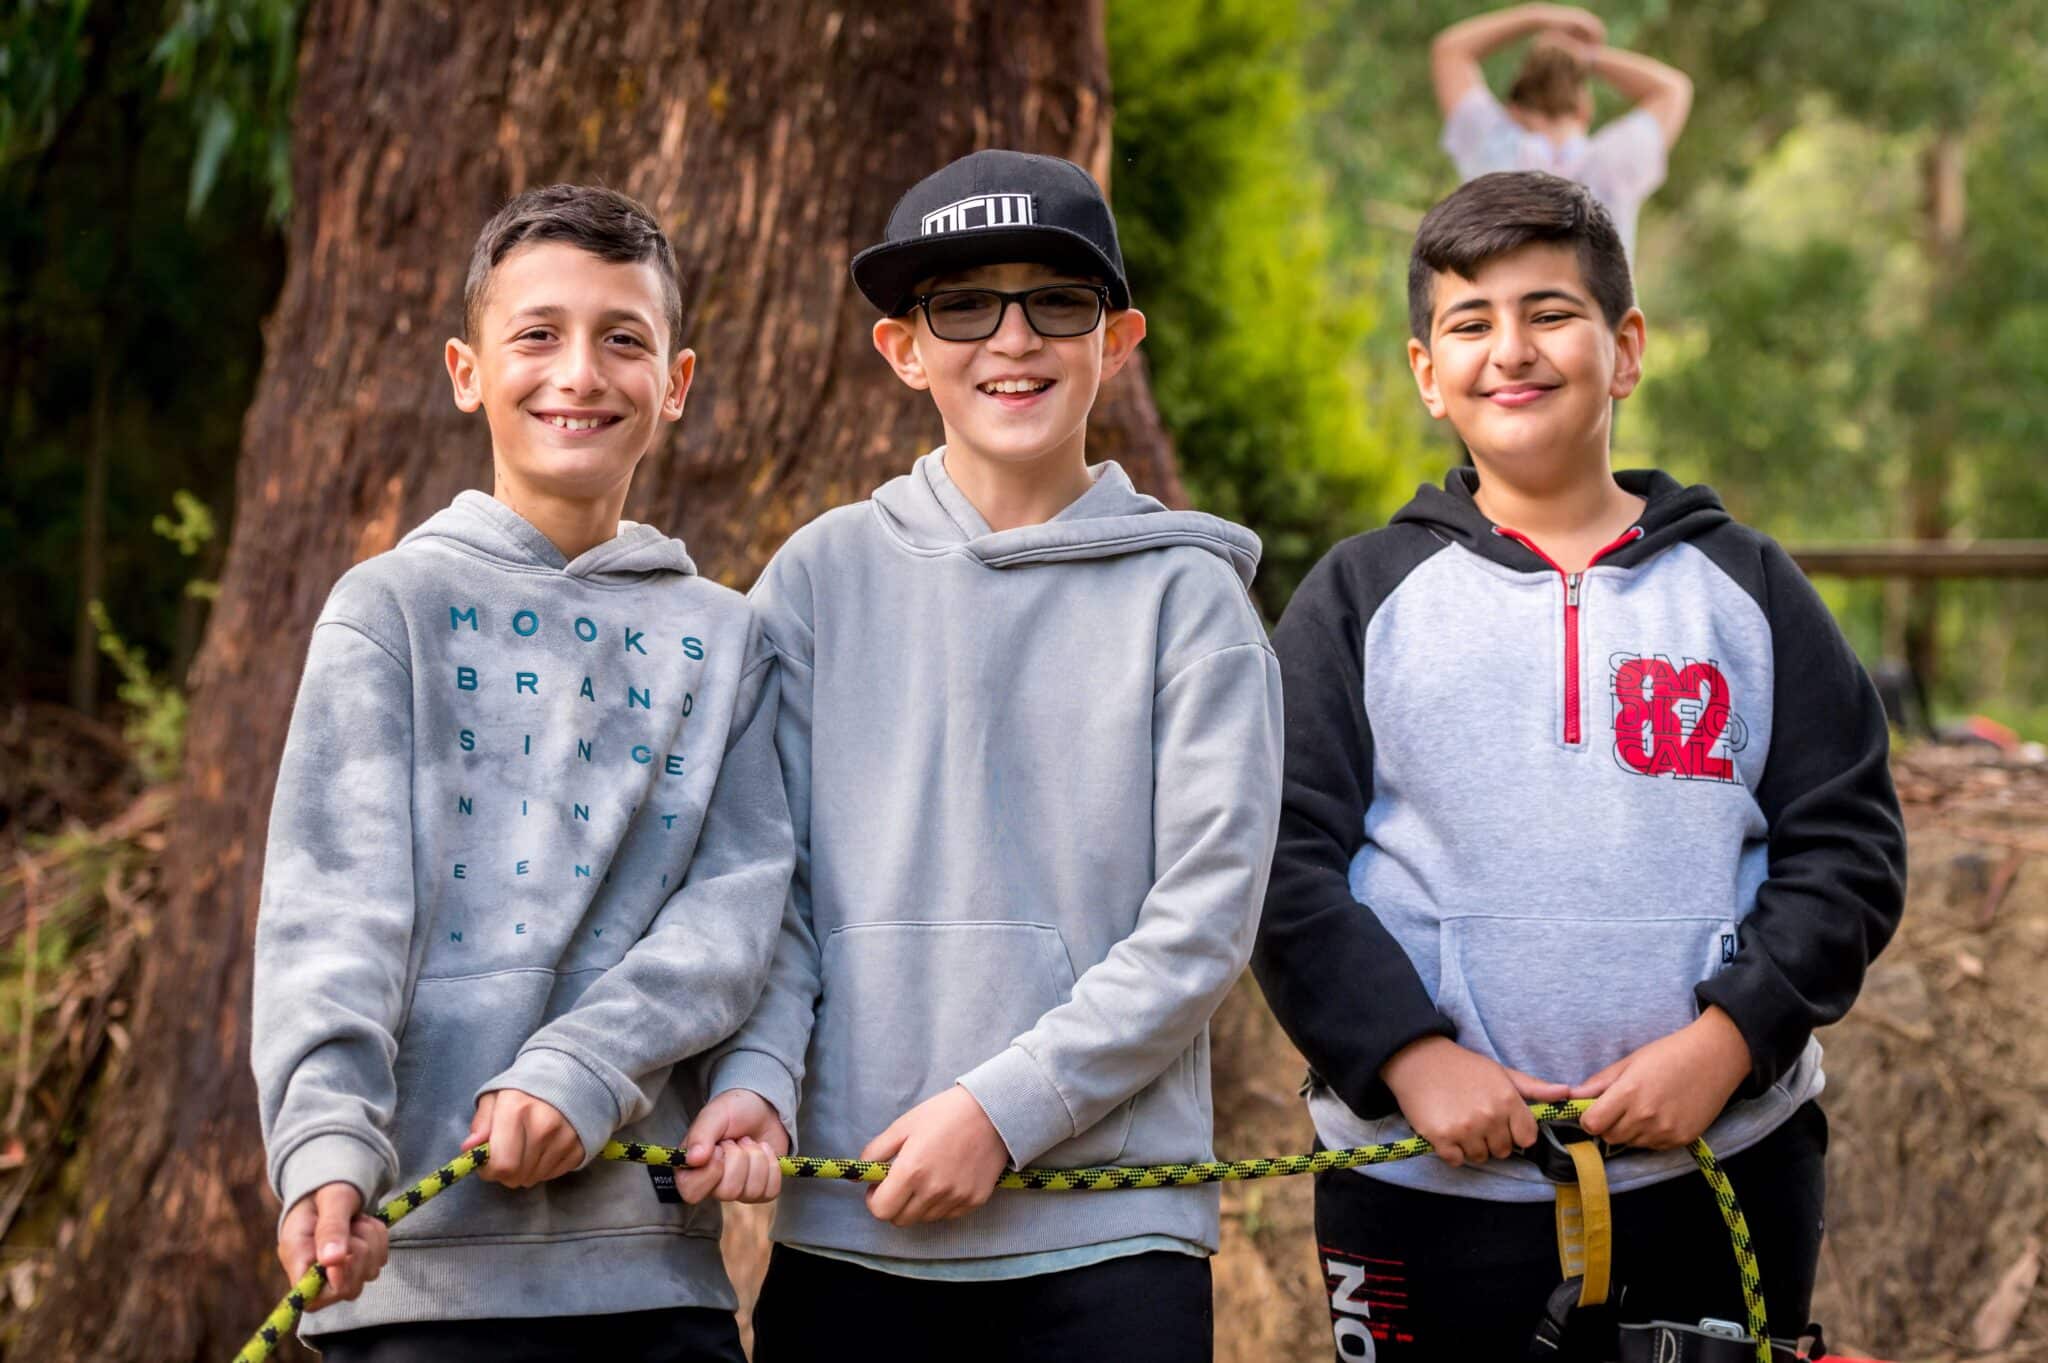 Three boys unite smiling outdoors, two gripping a rope; one wearing glasses and a cap, and a blurred person visible in the background.